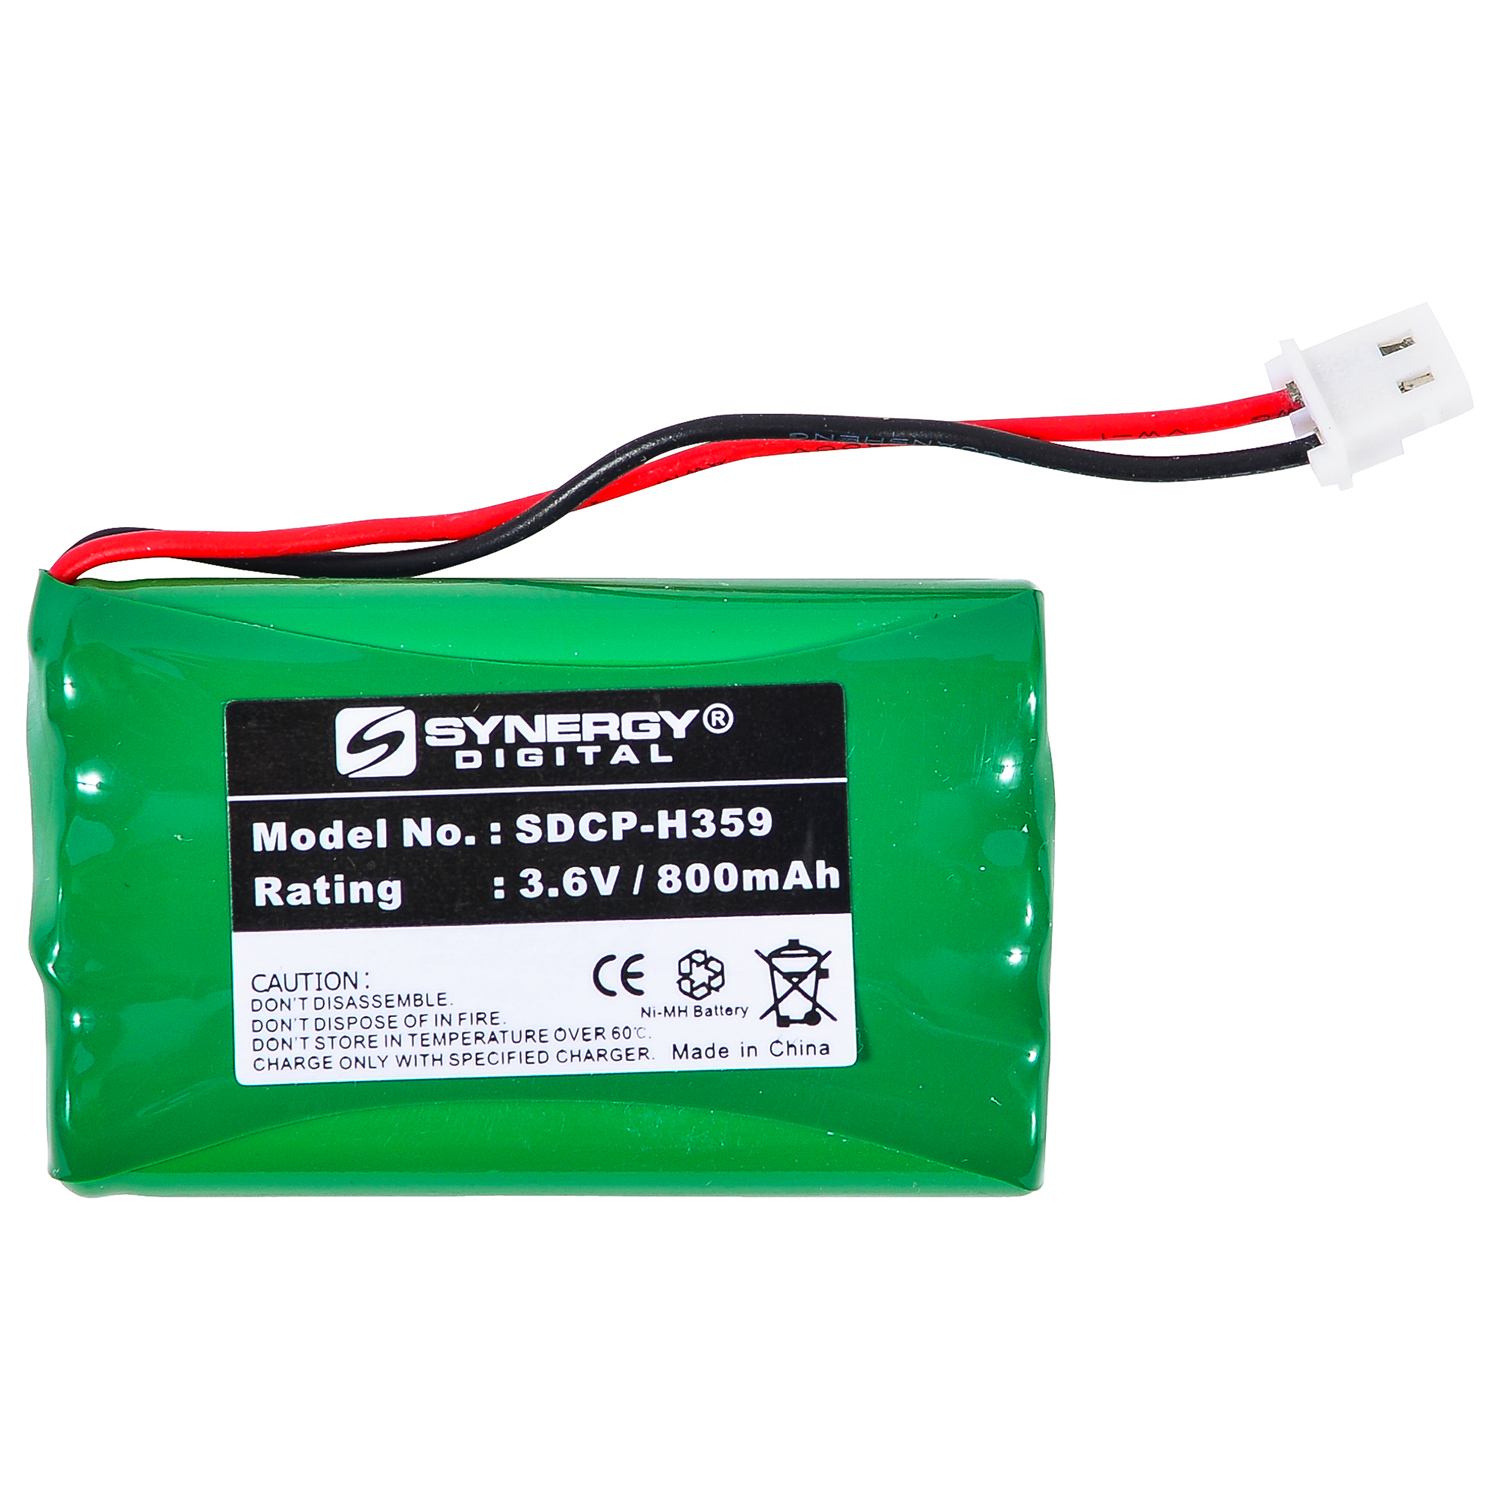 EM-CPH-488J - Ni-MH 1X3-5/4AAA/J, 3.6 Volt, 800 mAh, Ultra Hi-Capacity Battery - Replacement Battery for Rechargeable Cordless Phone Battery